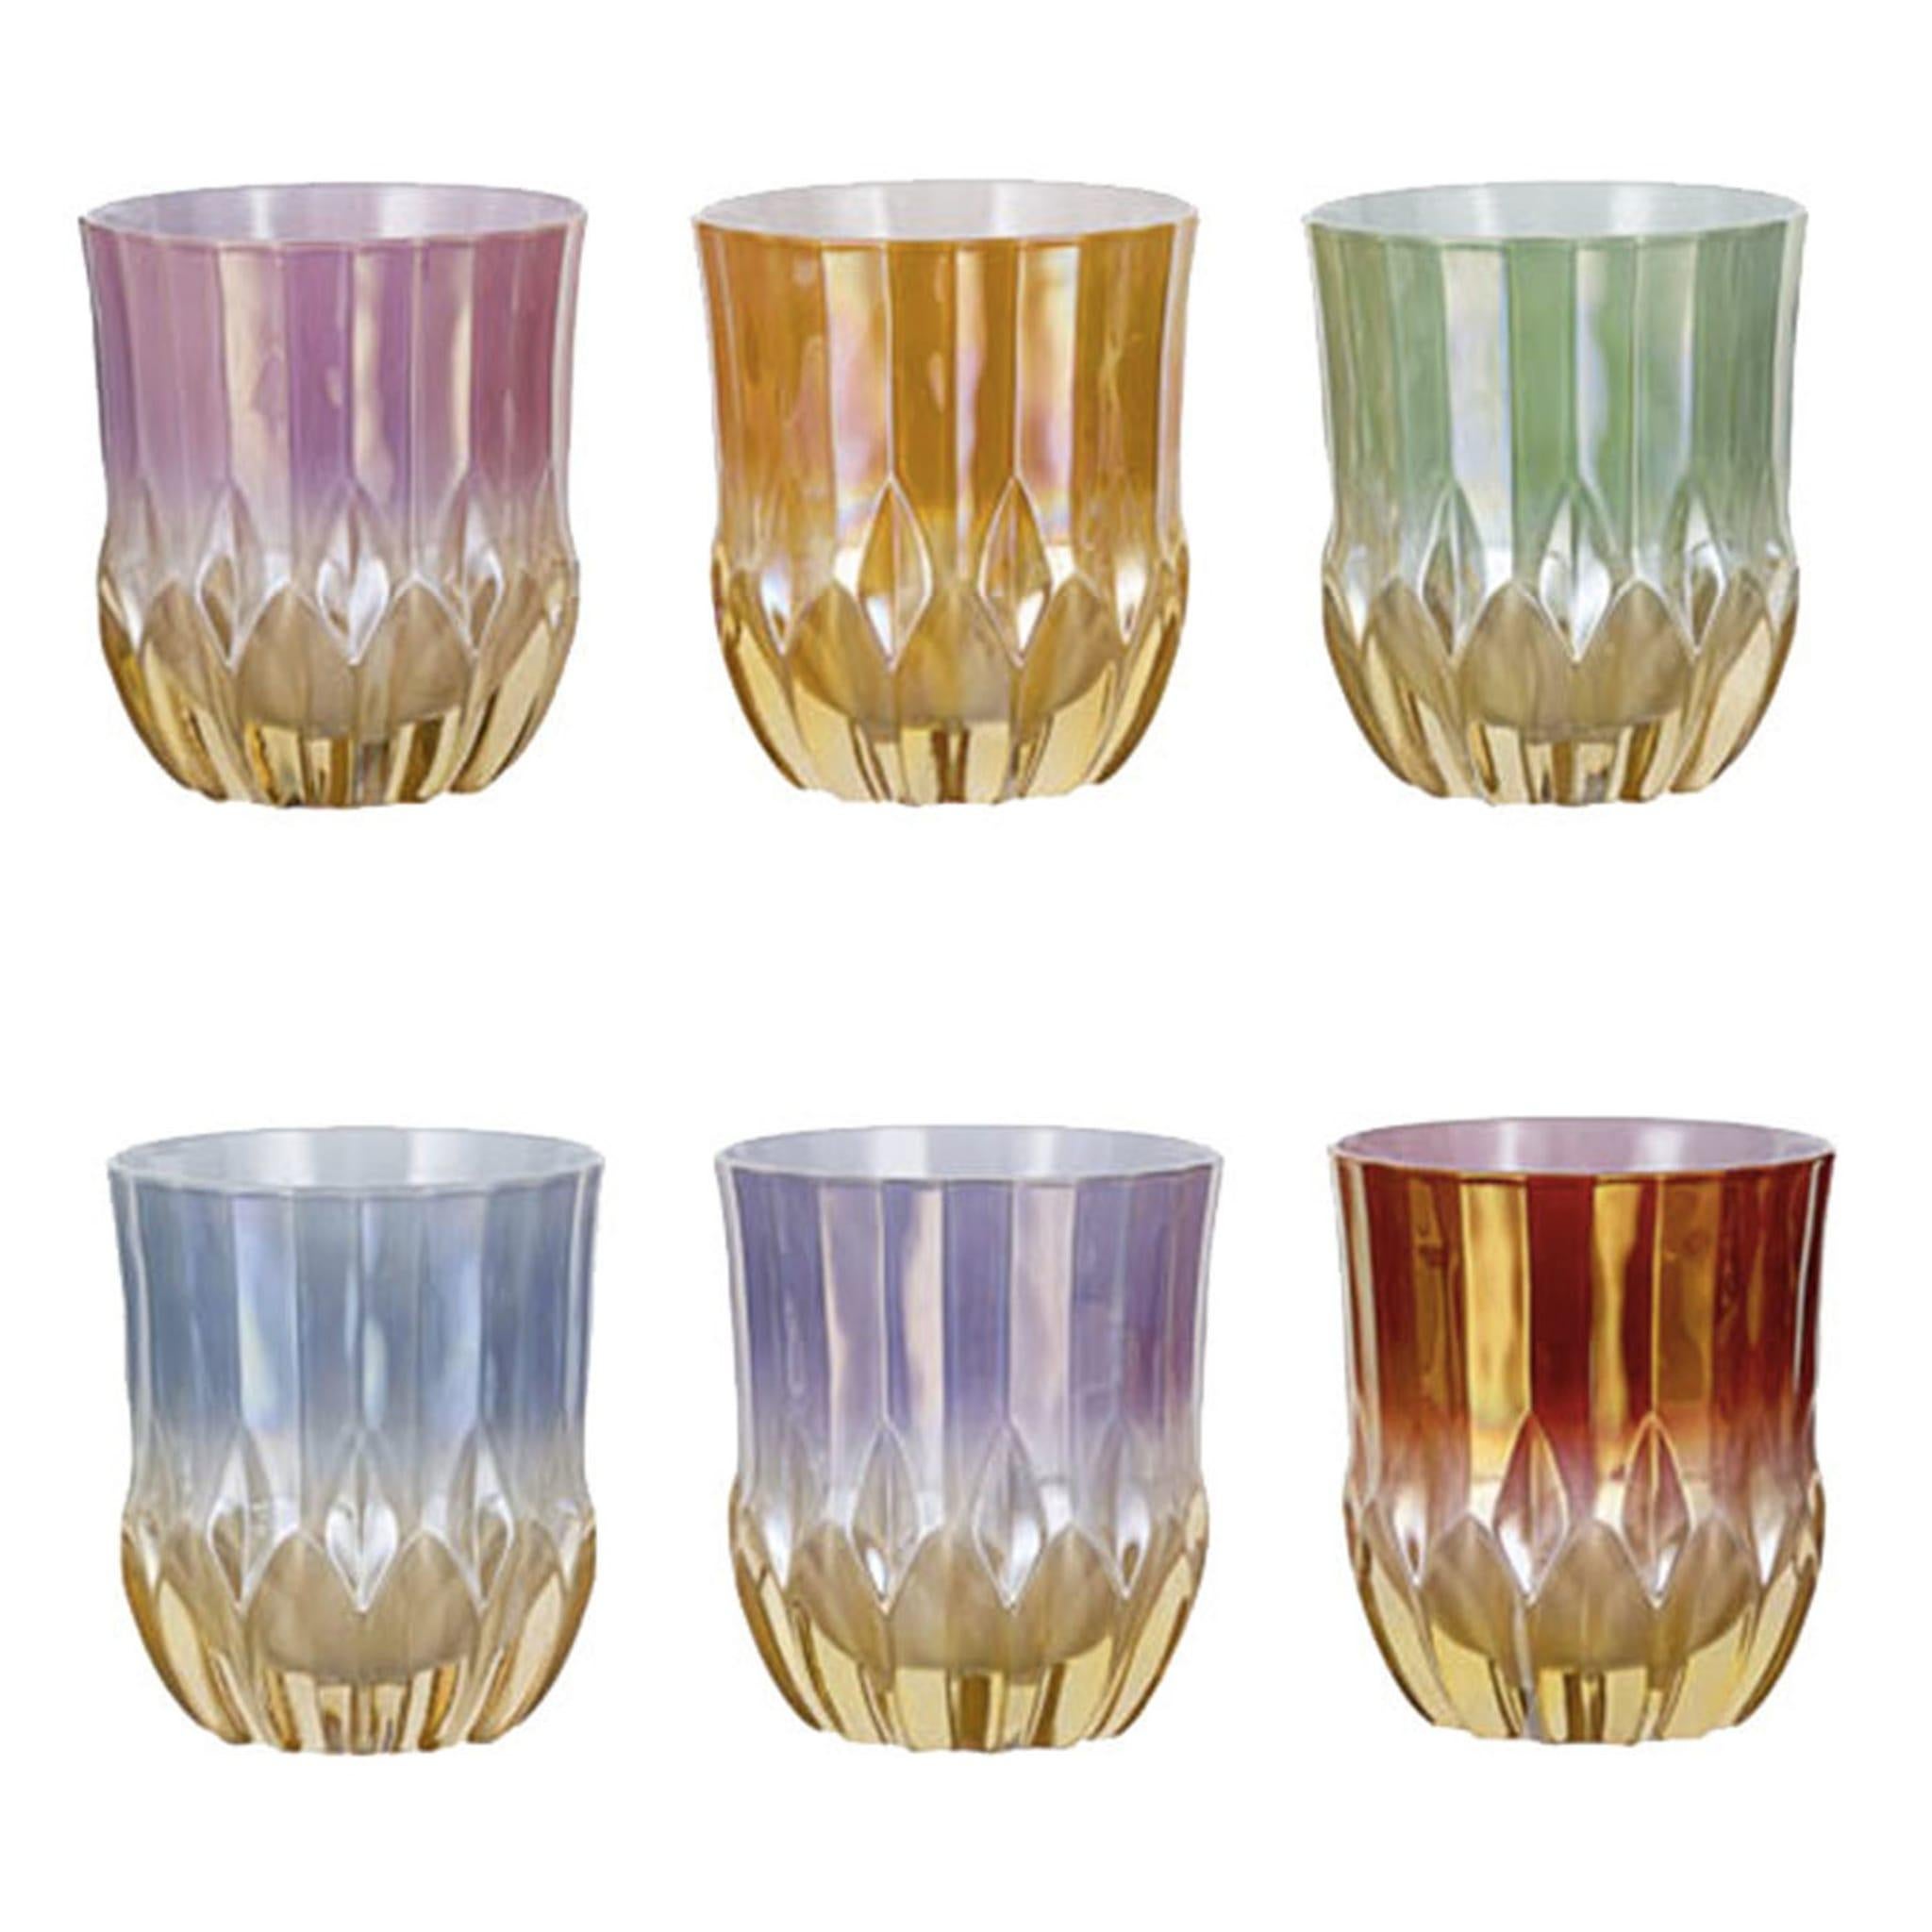 Precious and colorful, this set is comprised of six short glasses made of mouth-blown glass that can be used to serve after dinner drinks such as amaro or other liqueurs. Each glass has an amber-colored base, highlighted by the unique grooved